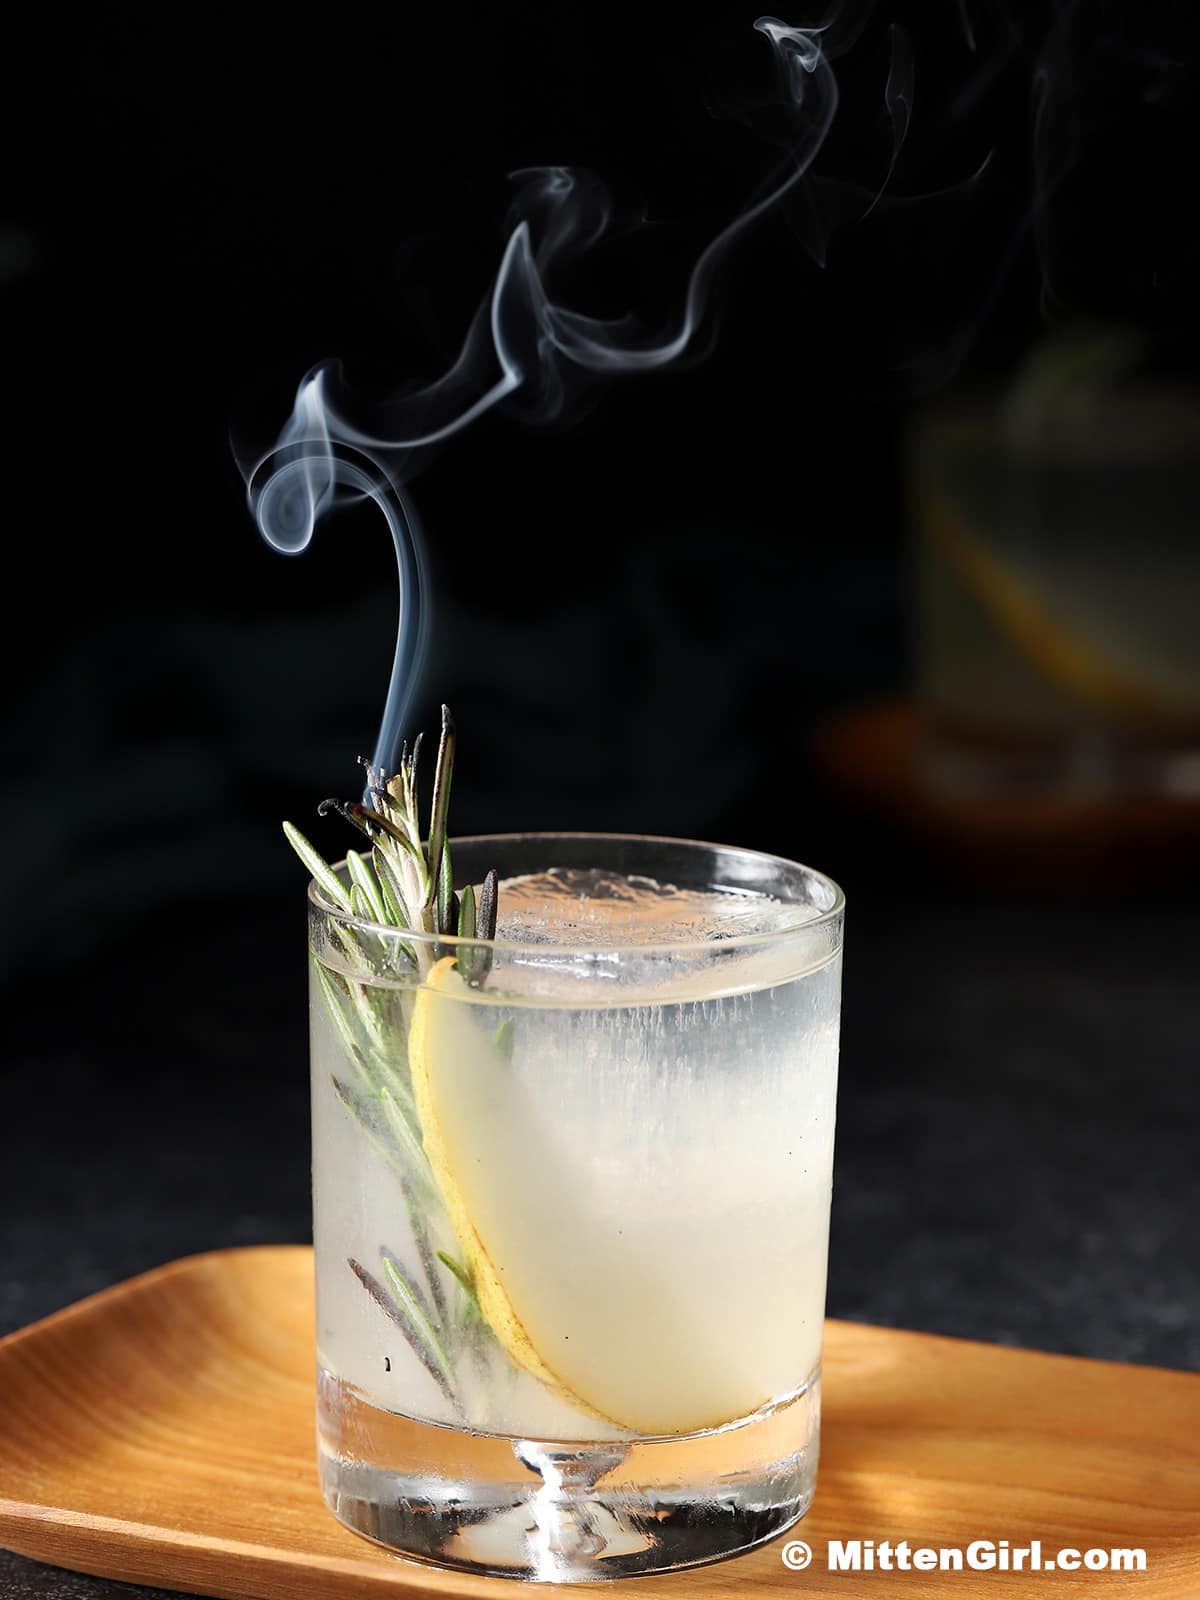 A glass of pear gin cocktail with a piece of rosemary. Smoke is rising from the rosemary.